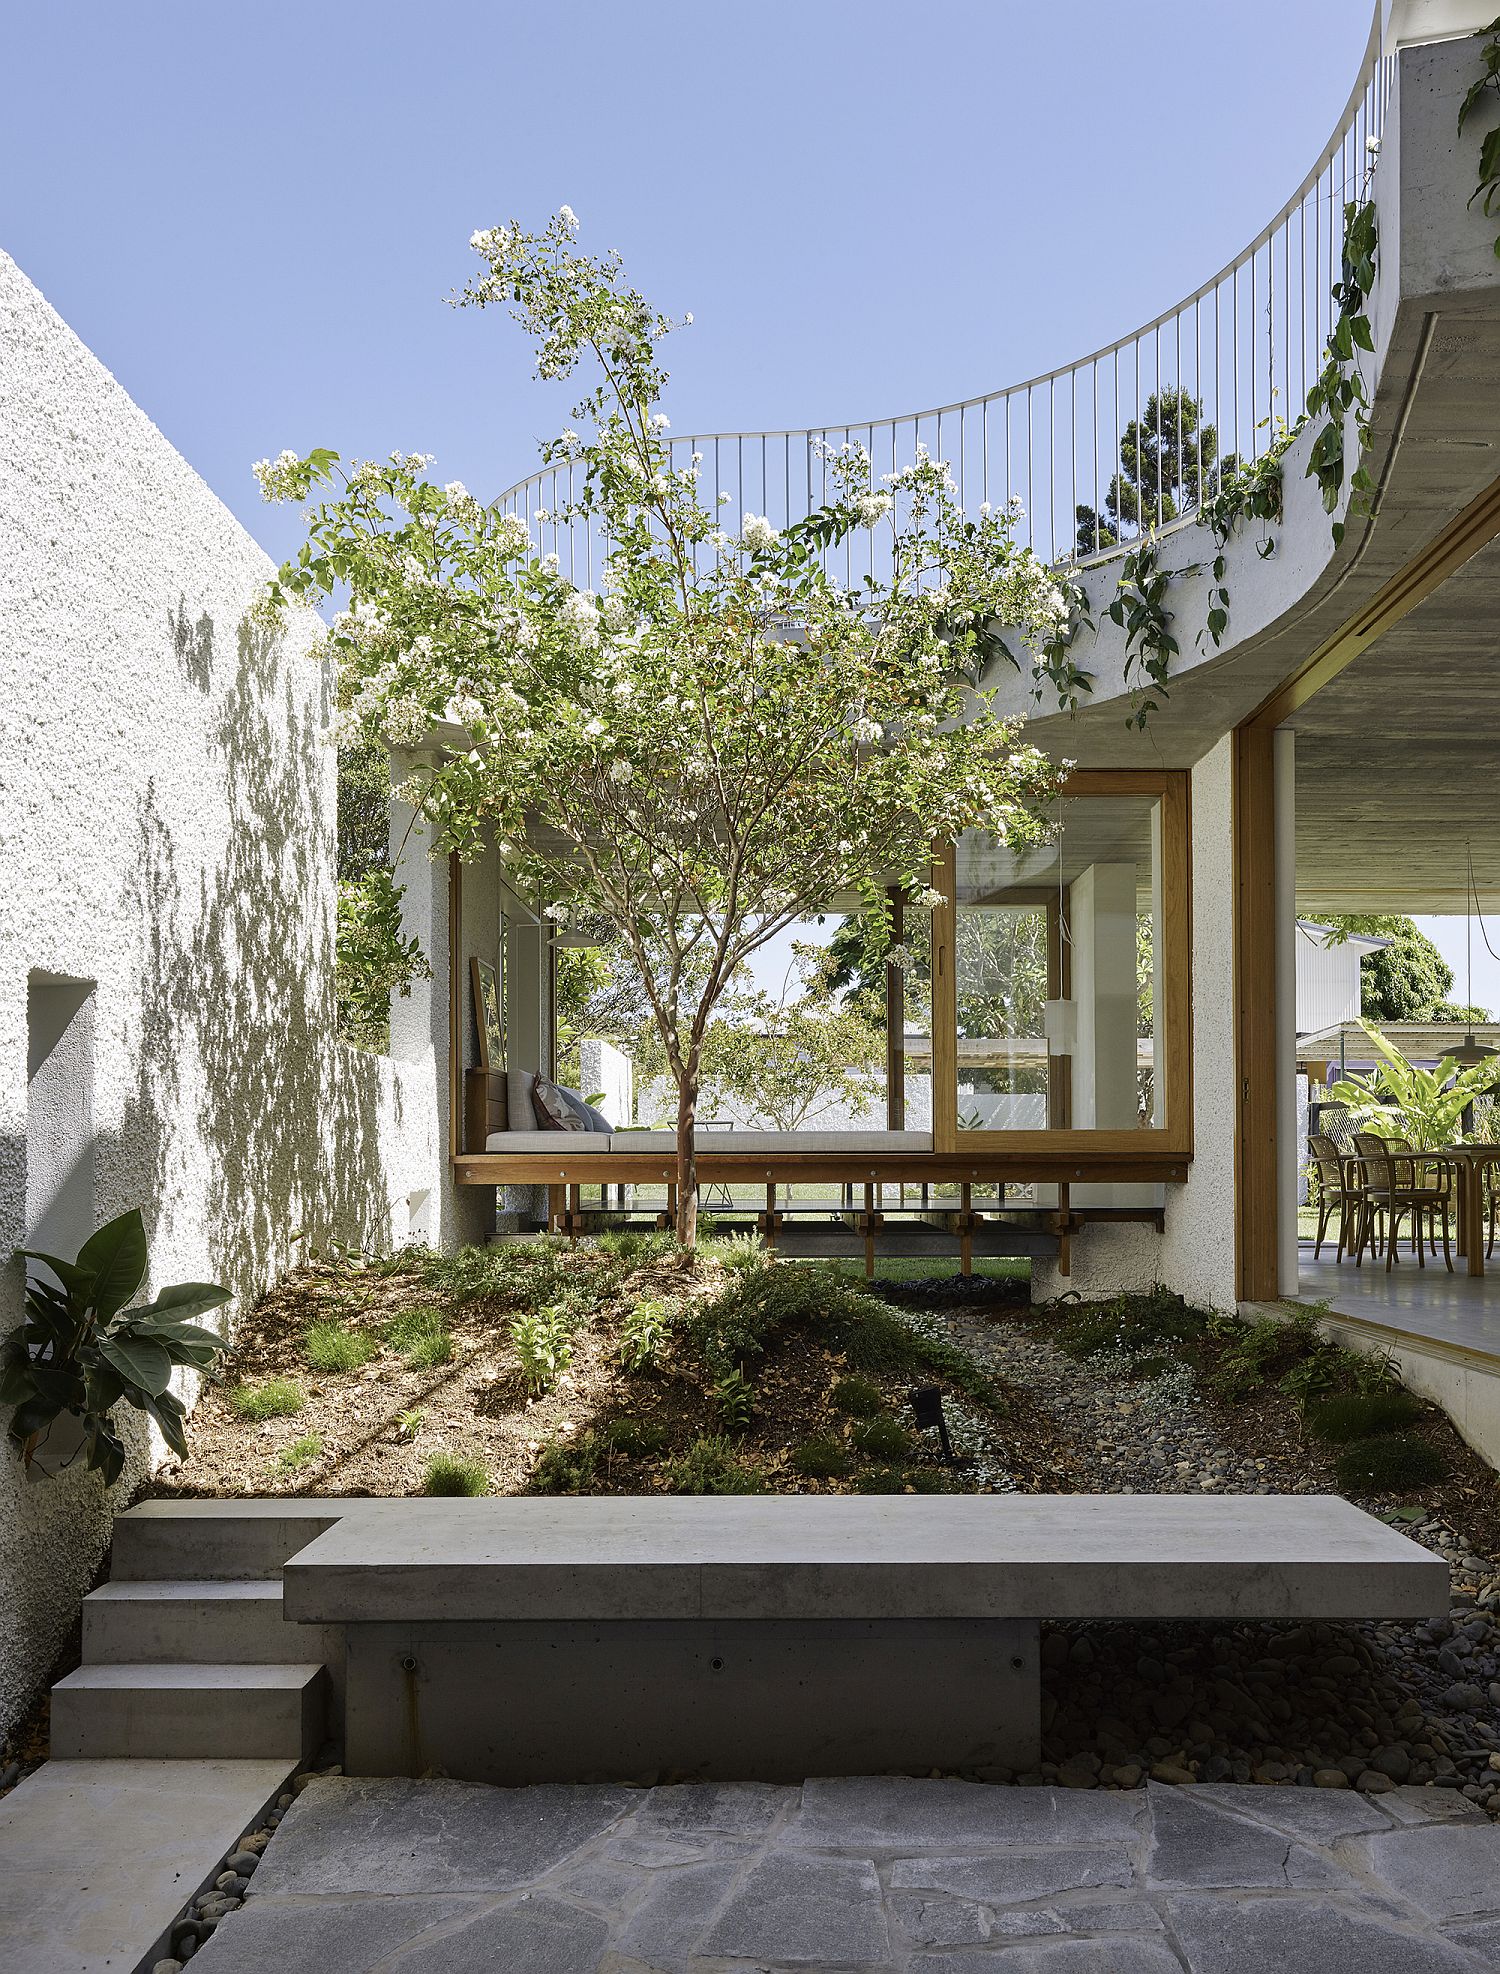 Open central courtyard spaces and gardens give the rear section of the house a relaxing naturall appeal